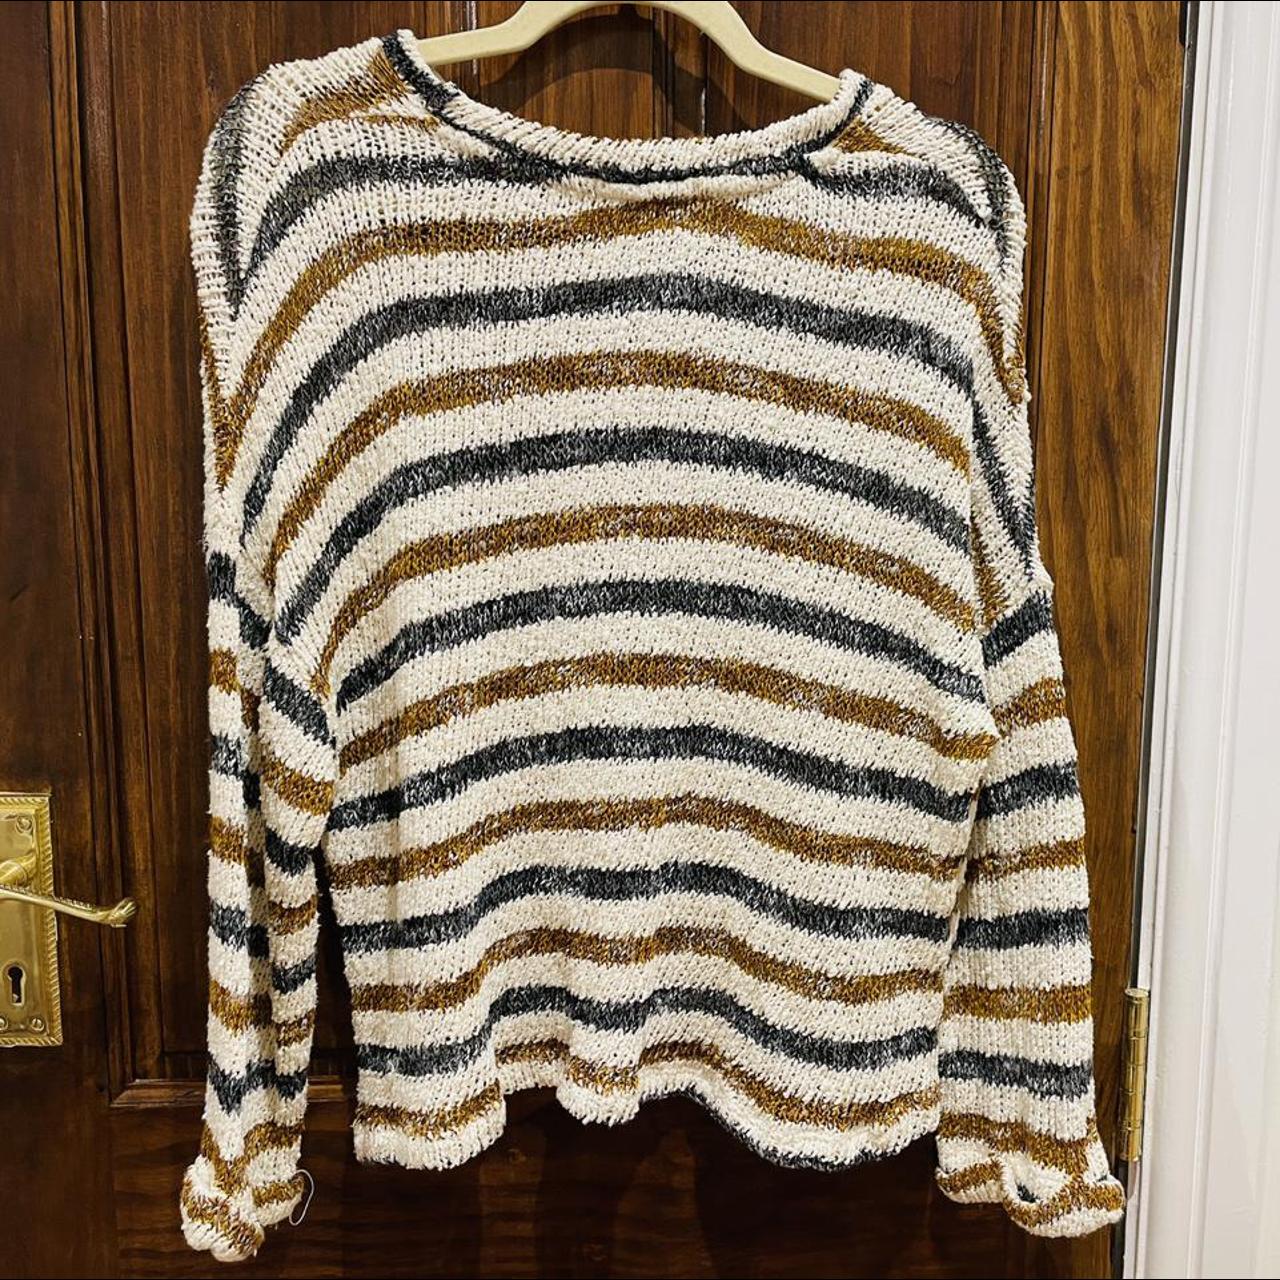 Used and in great condition! Mango stripes jumper.... - Depop